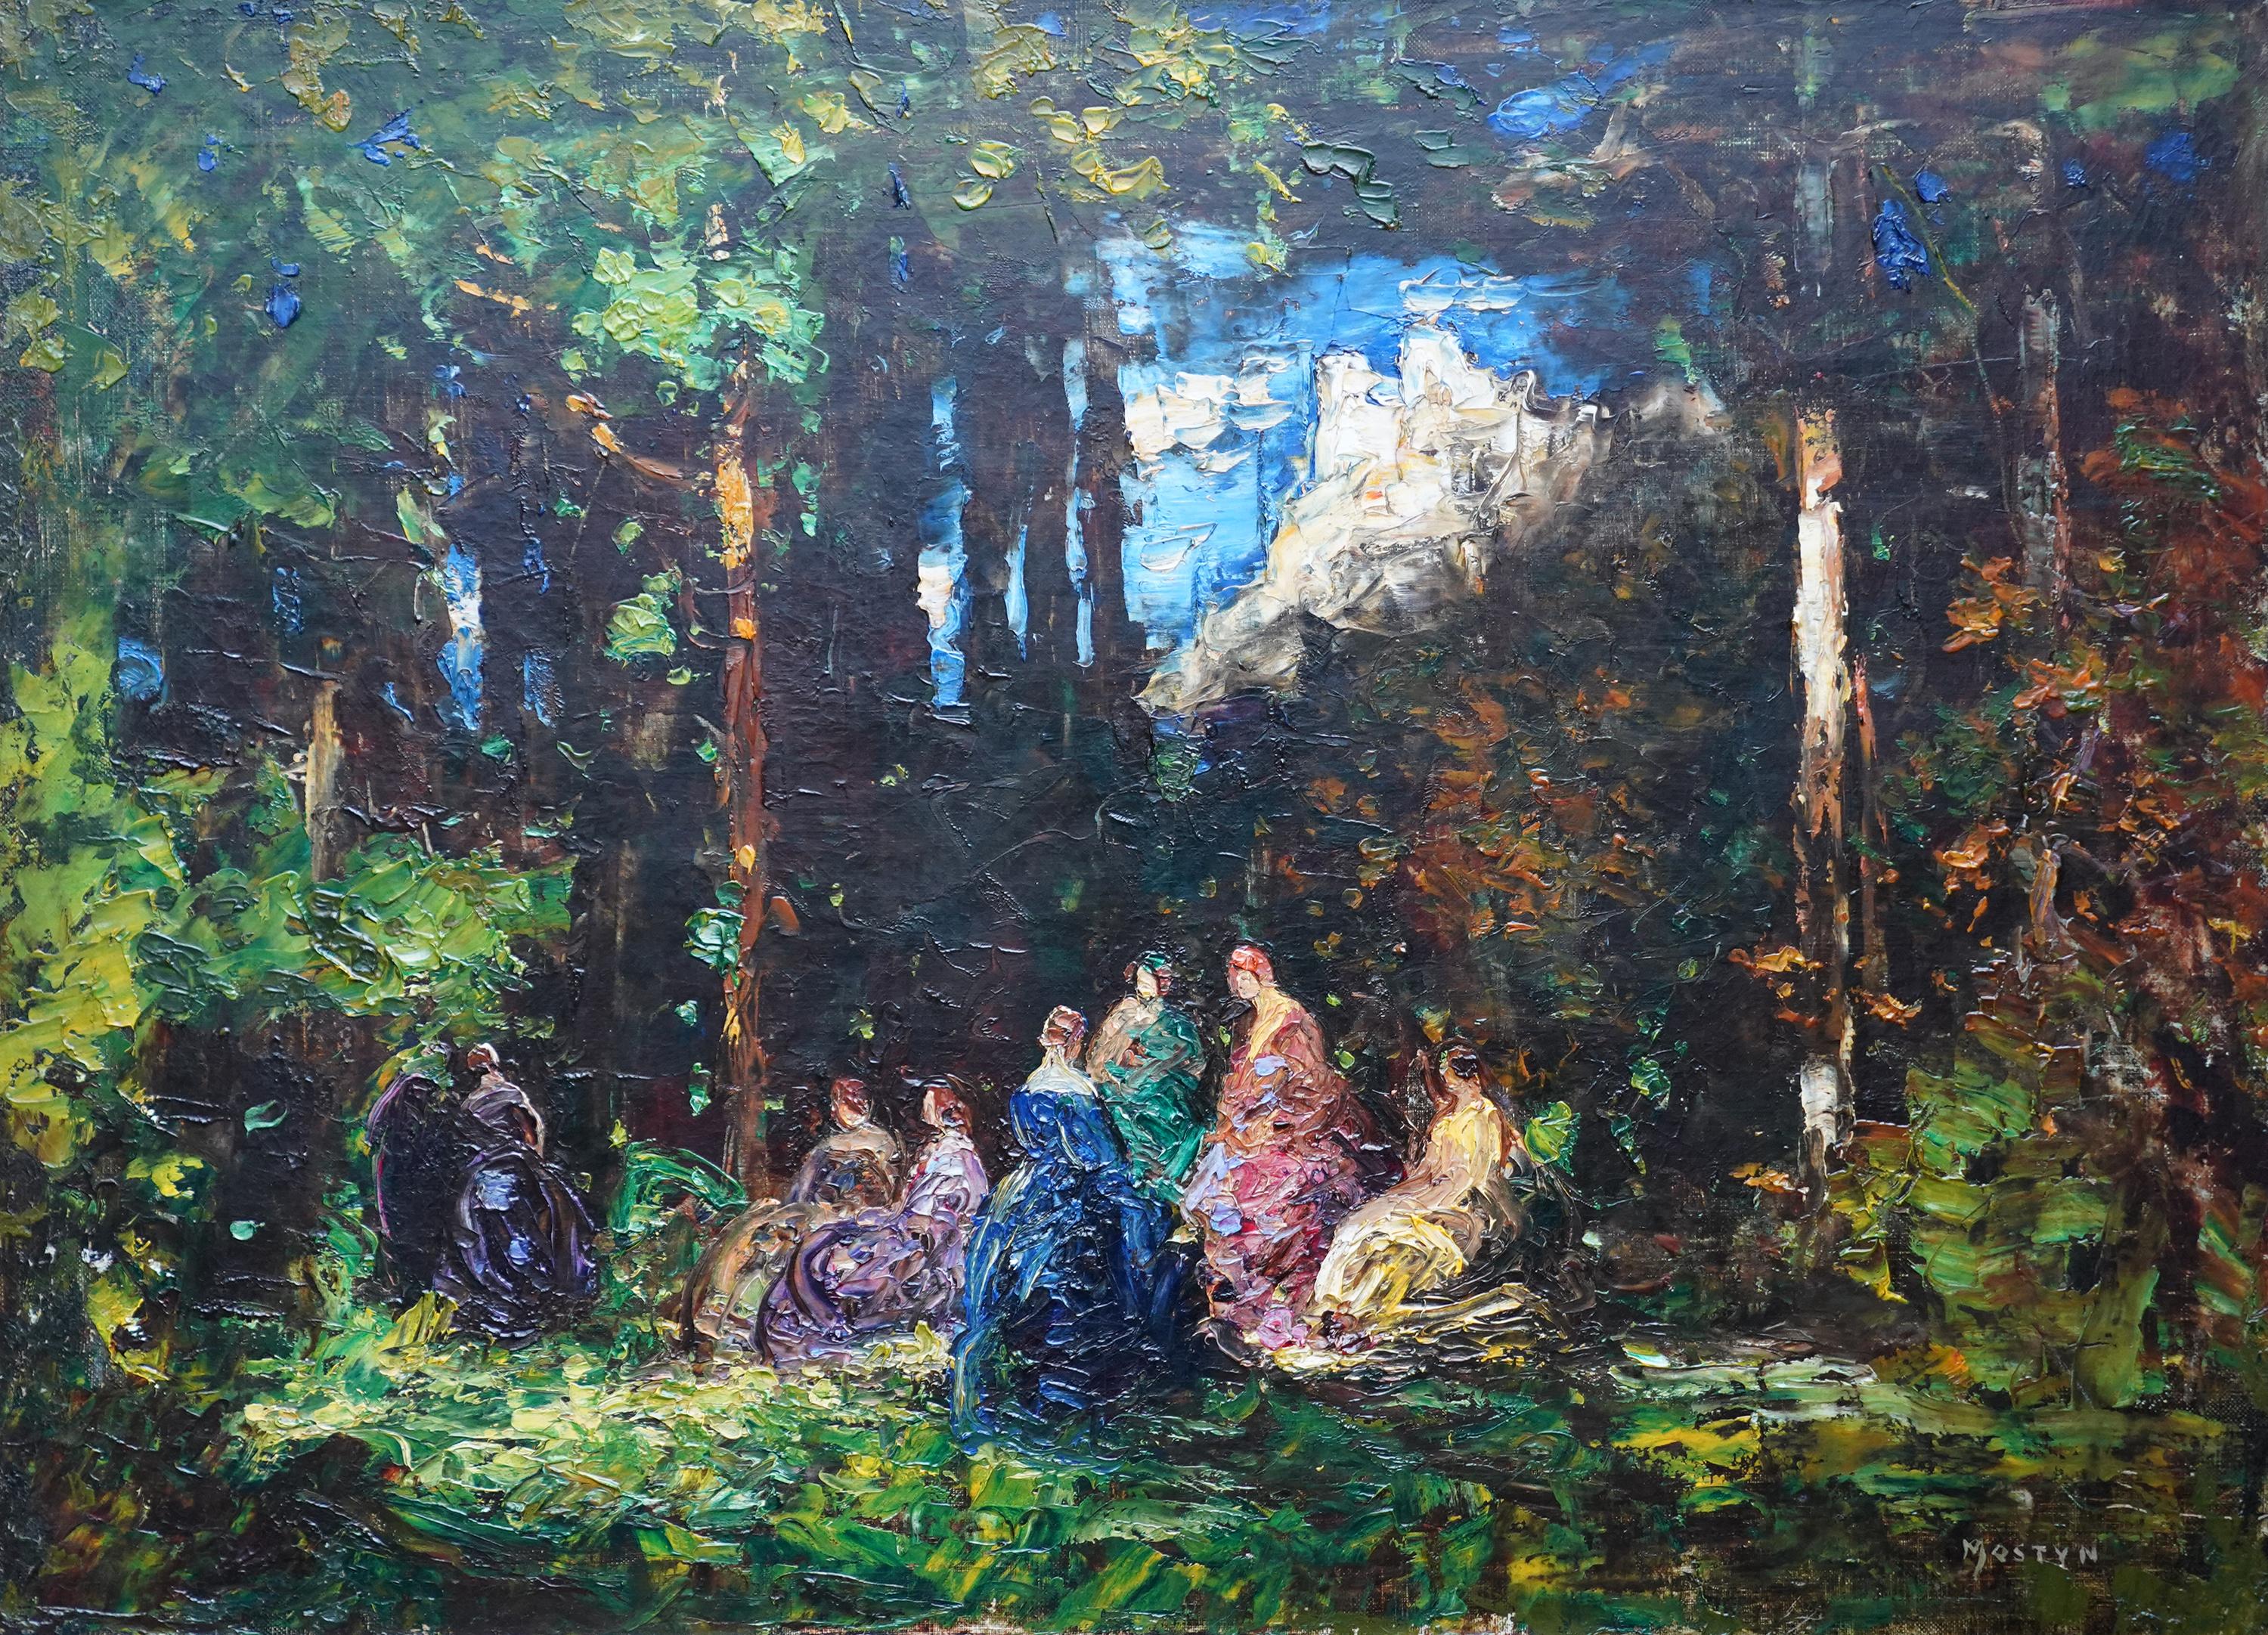 Elegant Ladies in a Woodland Clearing - British Edwardian landscape oil painting - Painting by Thomas Edwin Mostyn